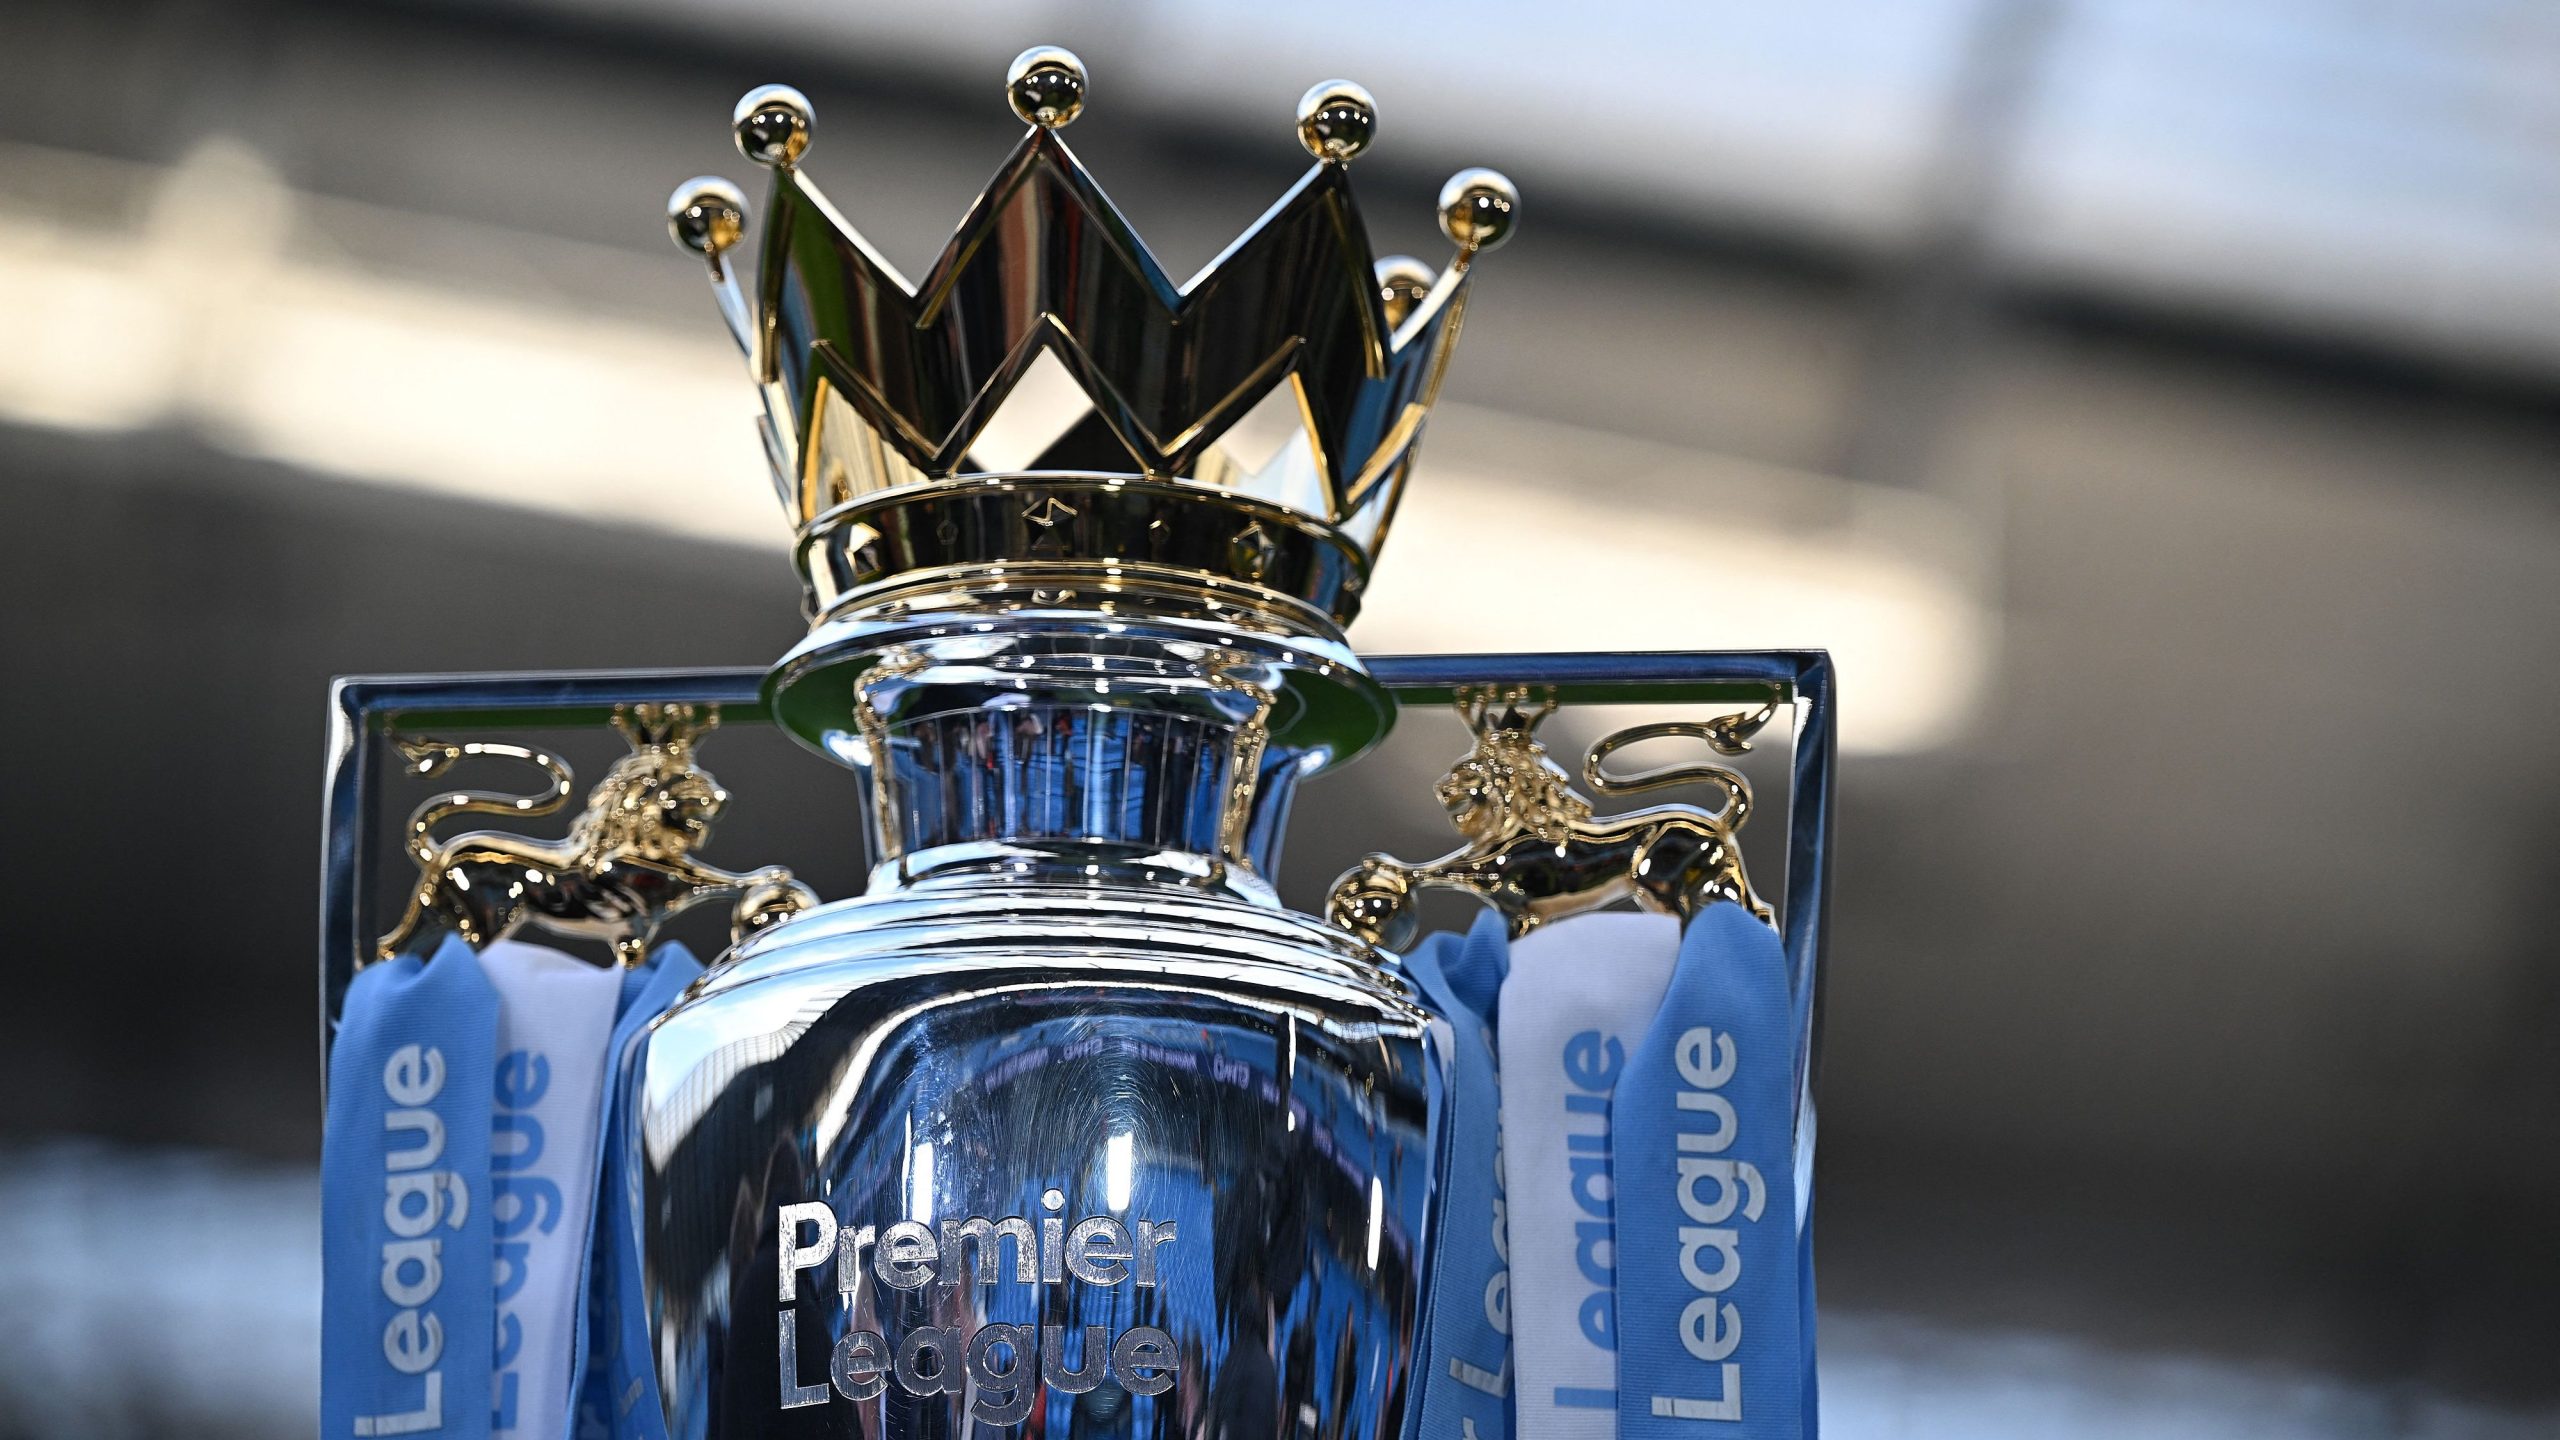 "They are the real deal" -- Rio Ferdinand on the EPL Title race